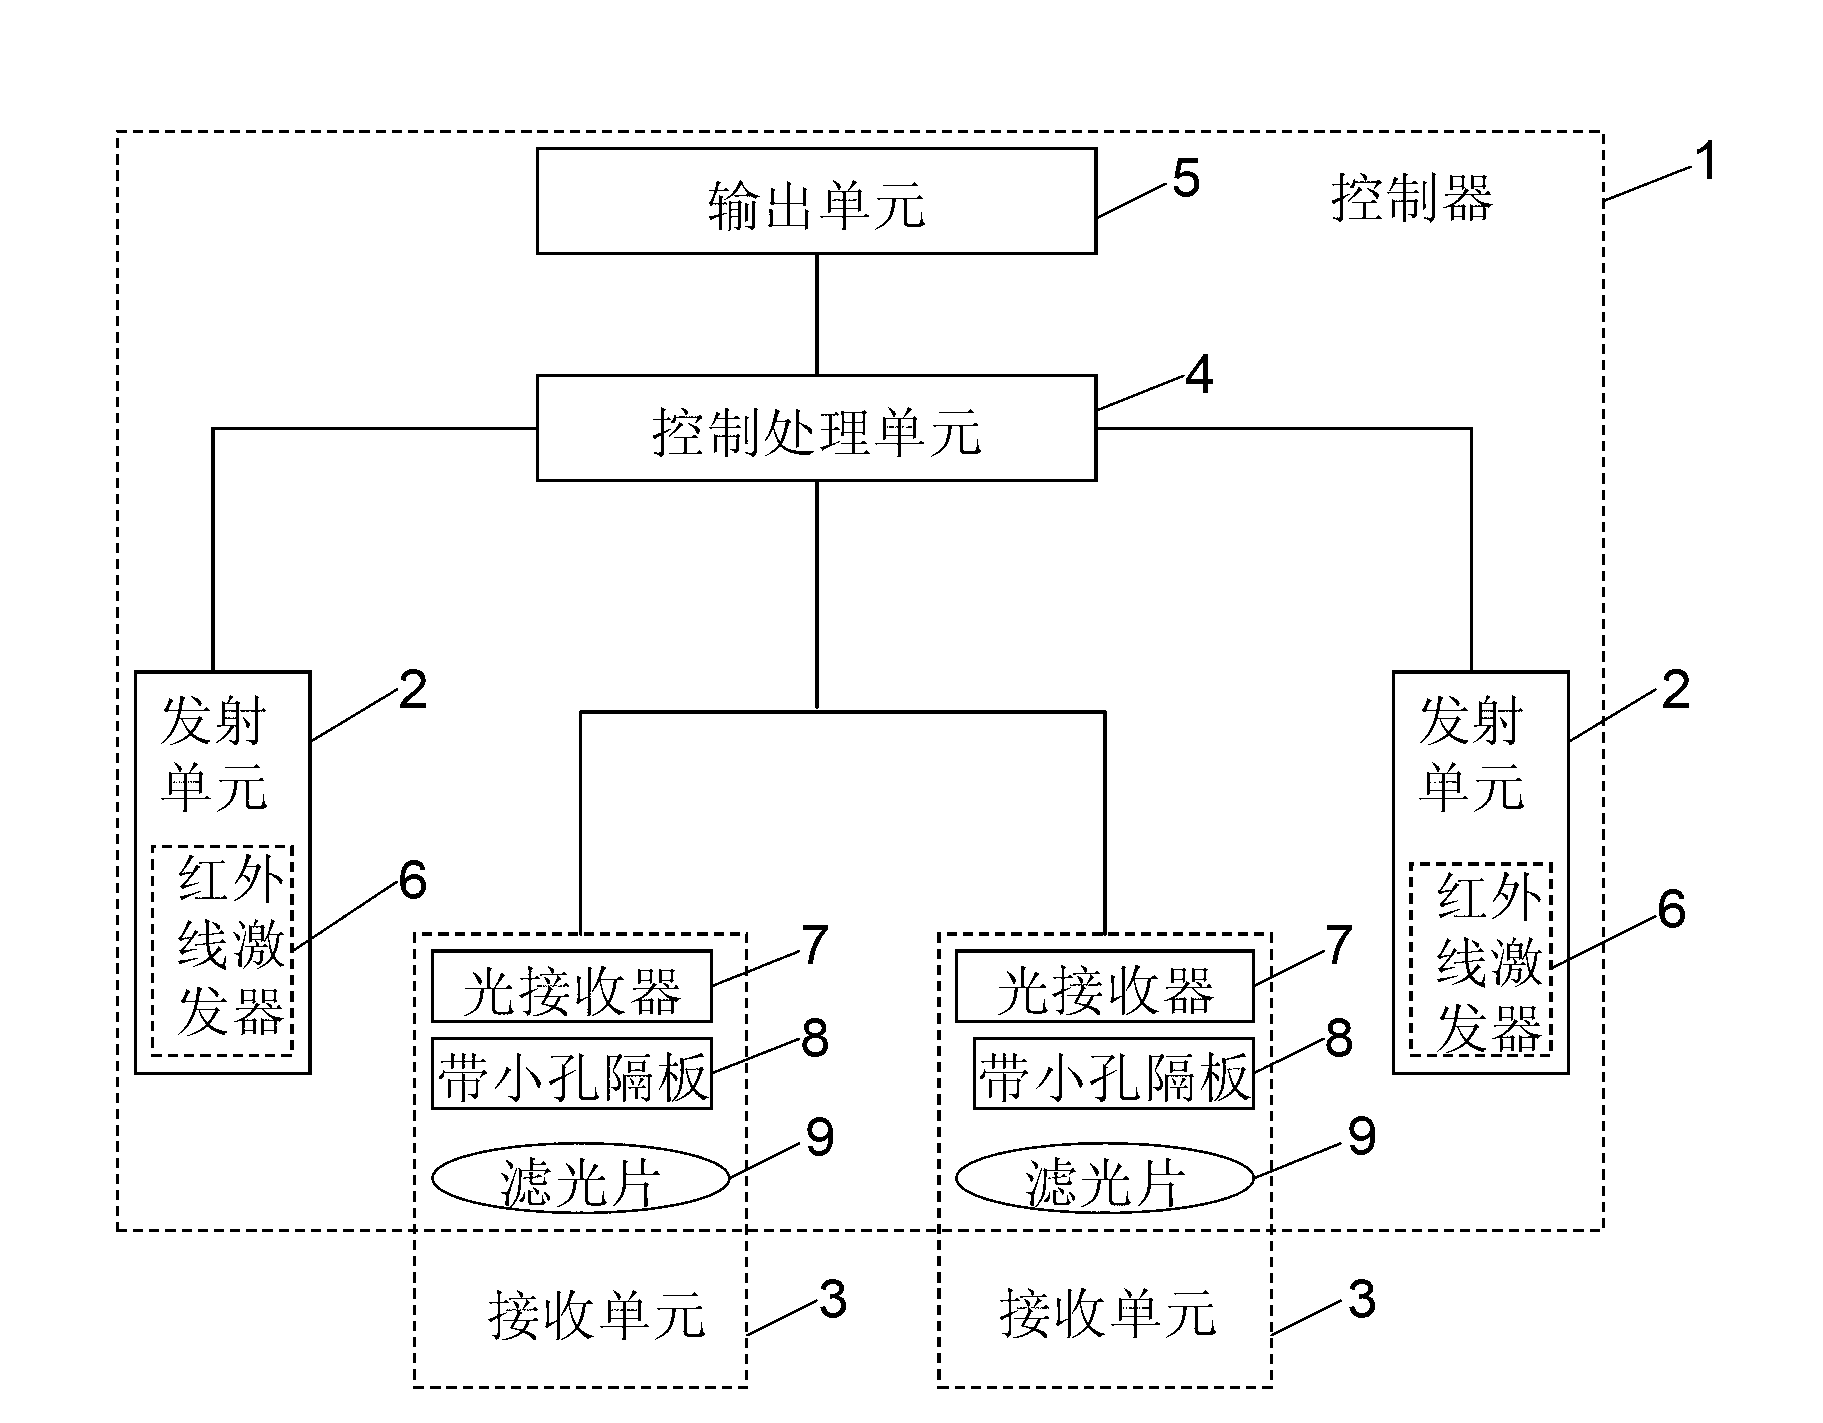 Infrared-based three-dimensional (3D) gesture recognition controller and realization method